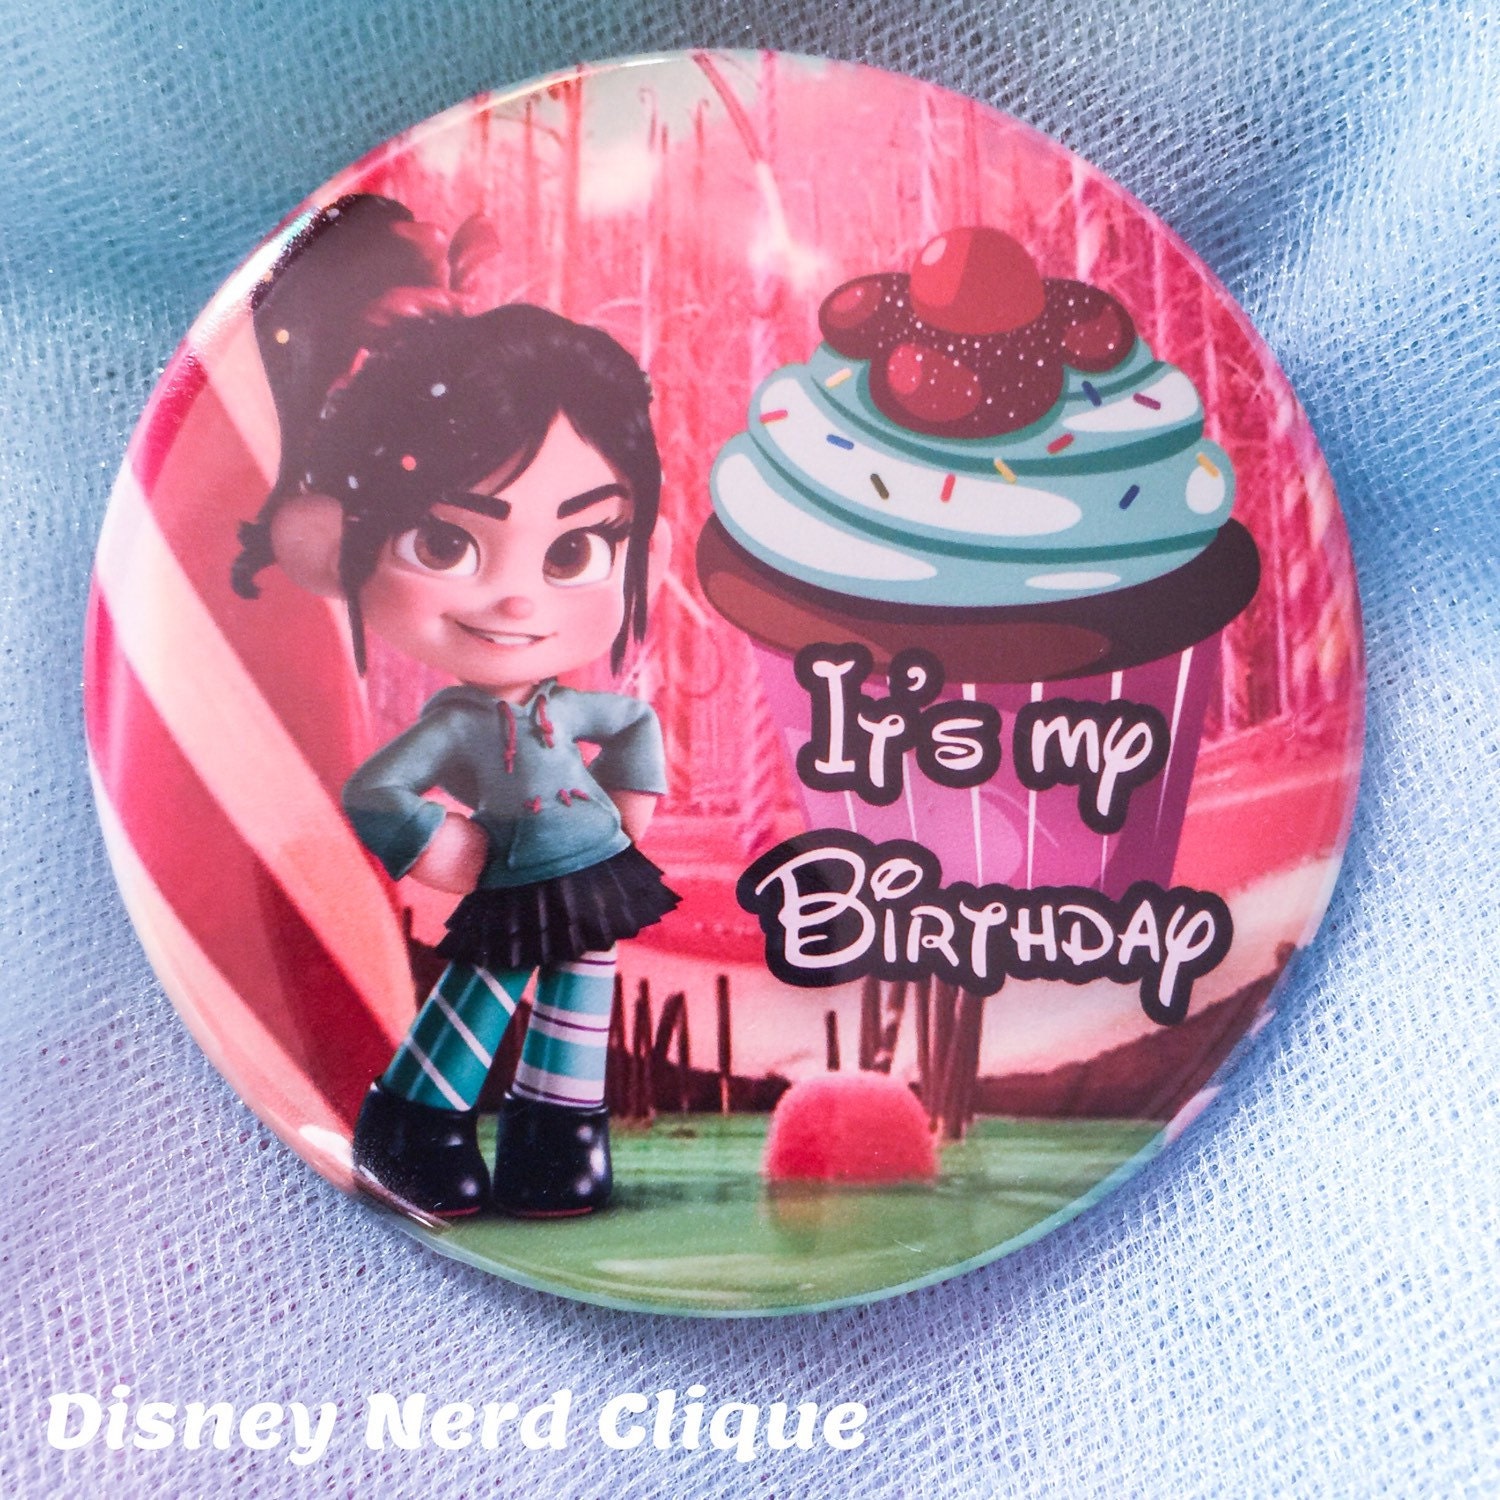 Disney Trading Pins 142614 Pin of the Month - Scents - Vanellope